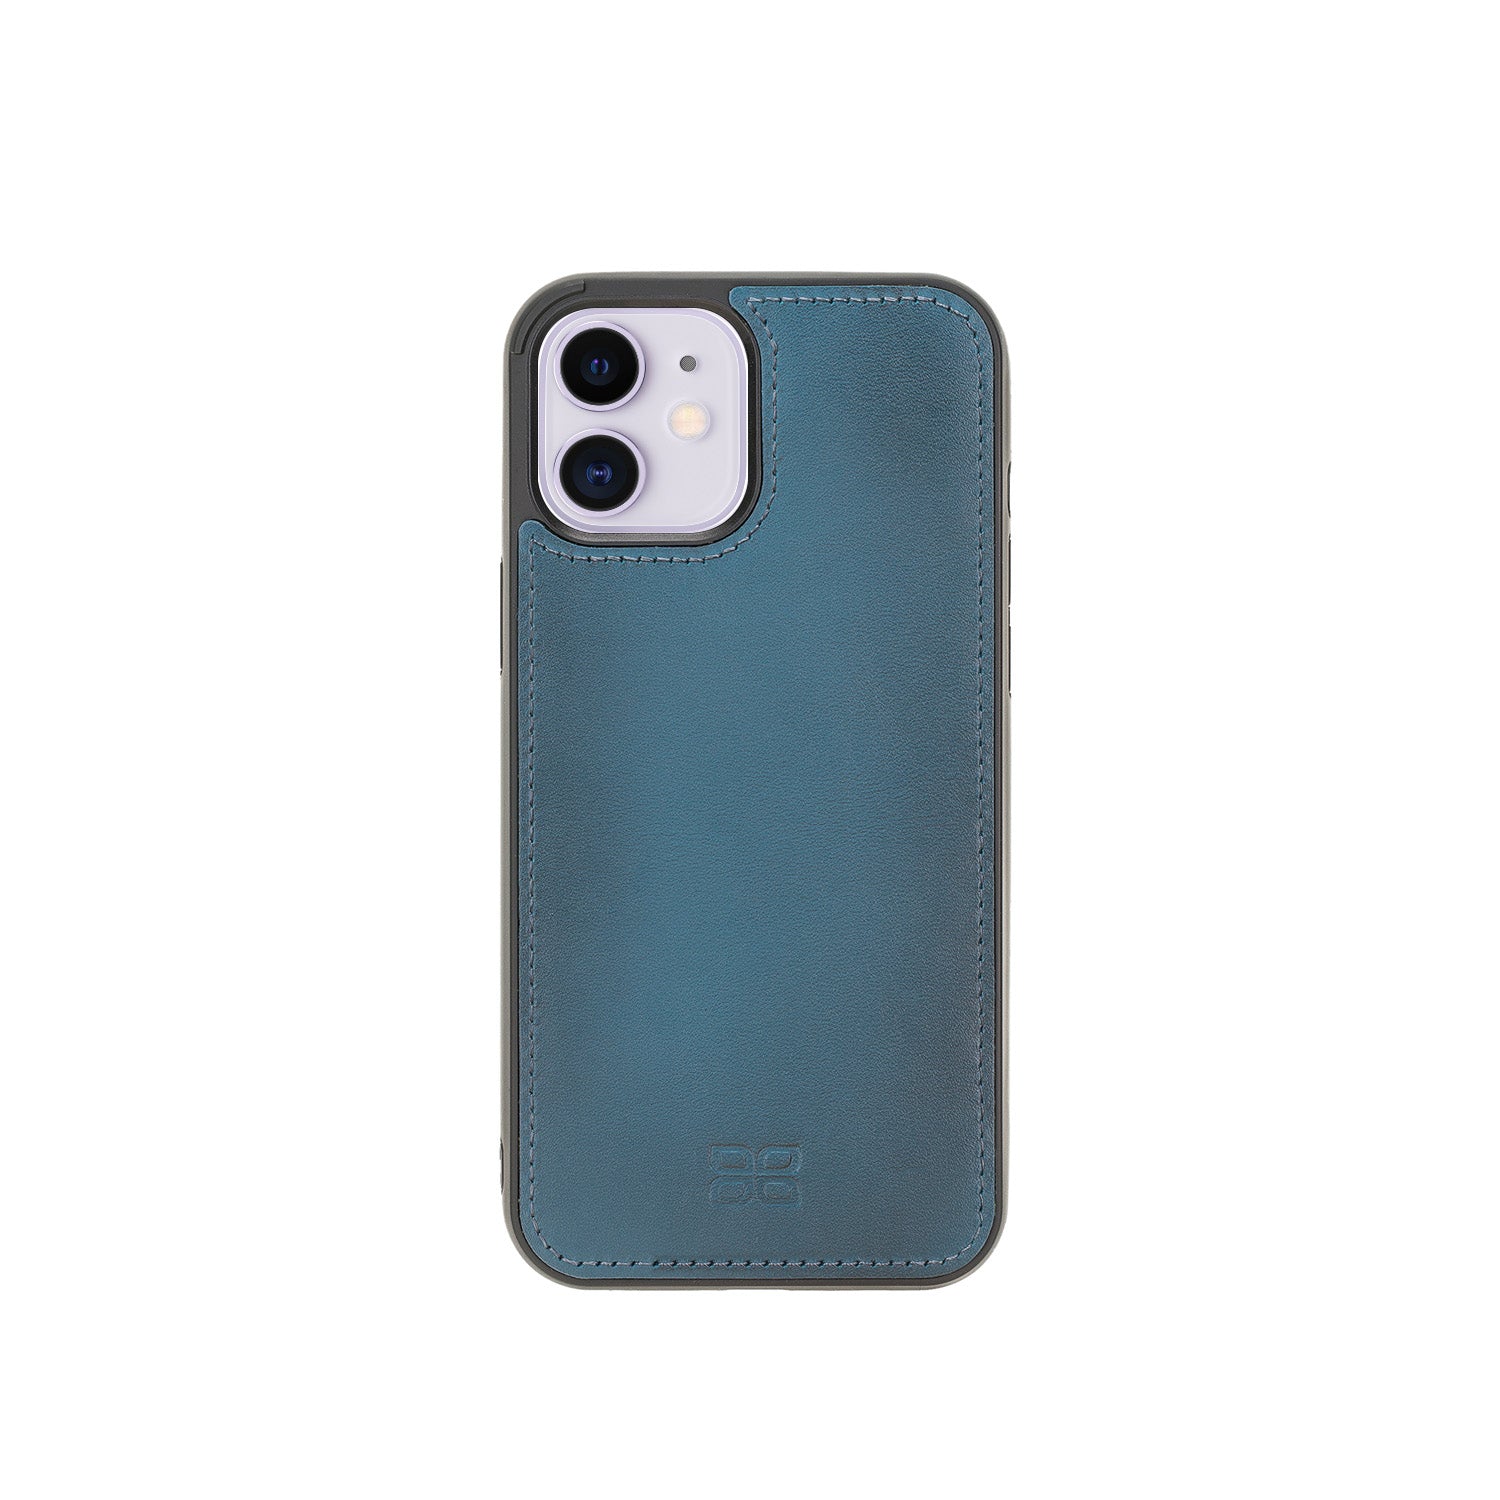 Flex Cover Leather Back Case for iPhone 12 Mini (5.4") - BLUE - saracleather